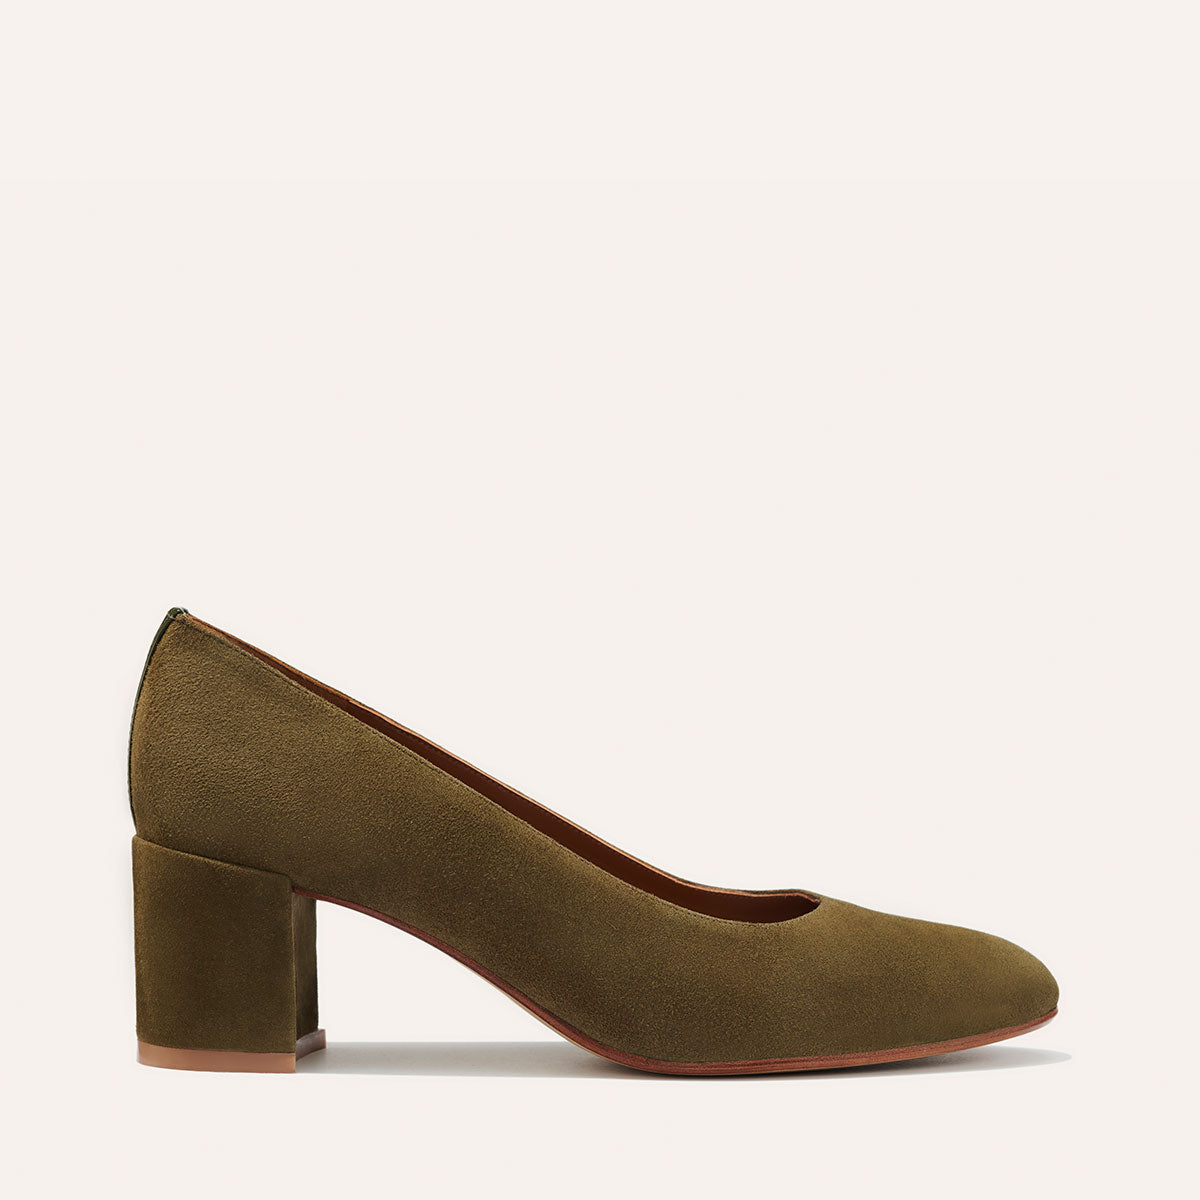 Margaux's classic and comfortable workwear Heel, made in Spain from soft, olive green Italian suede